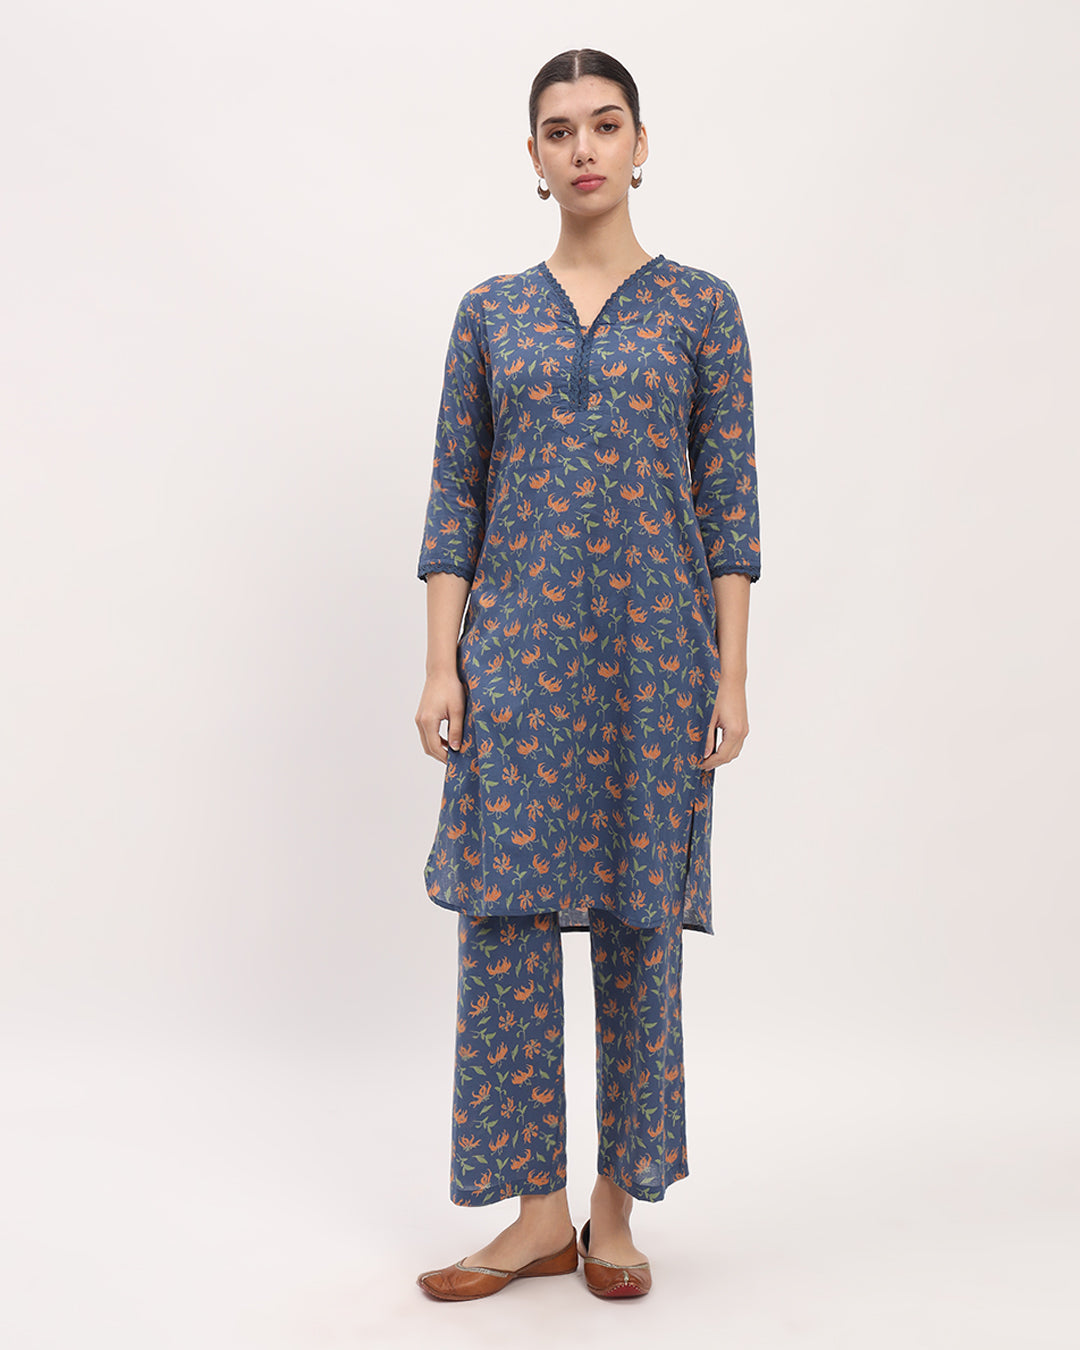 Fire Lillies Elegance Lace Affair Printed Kurta (Without Bottoms)